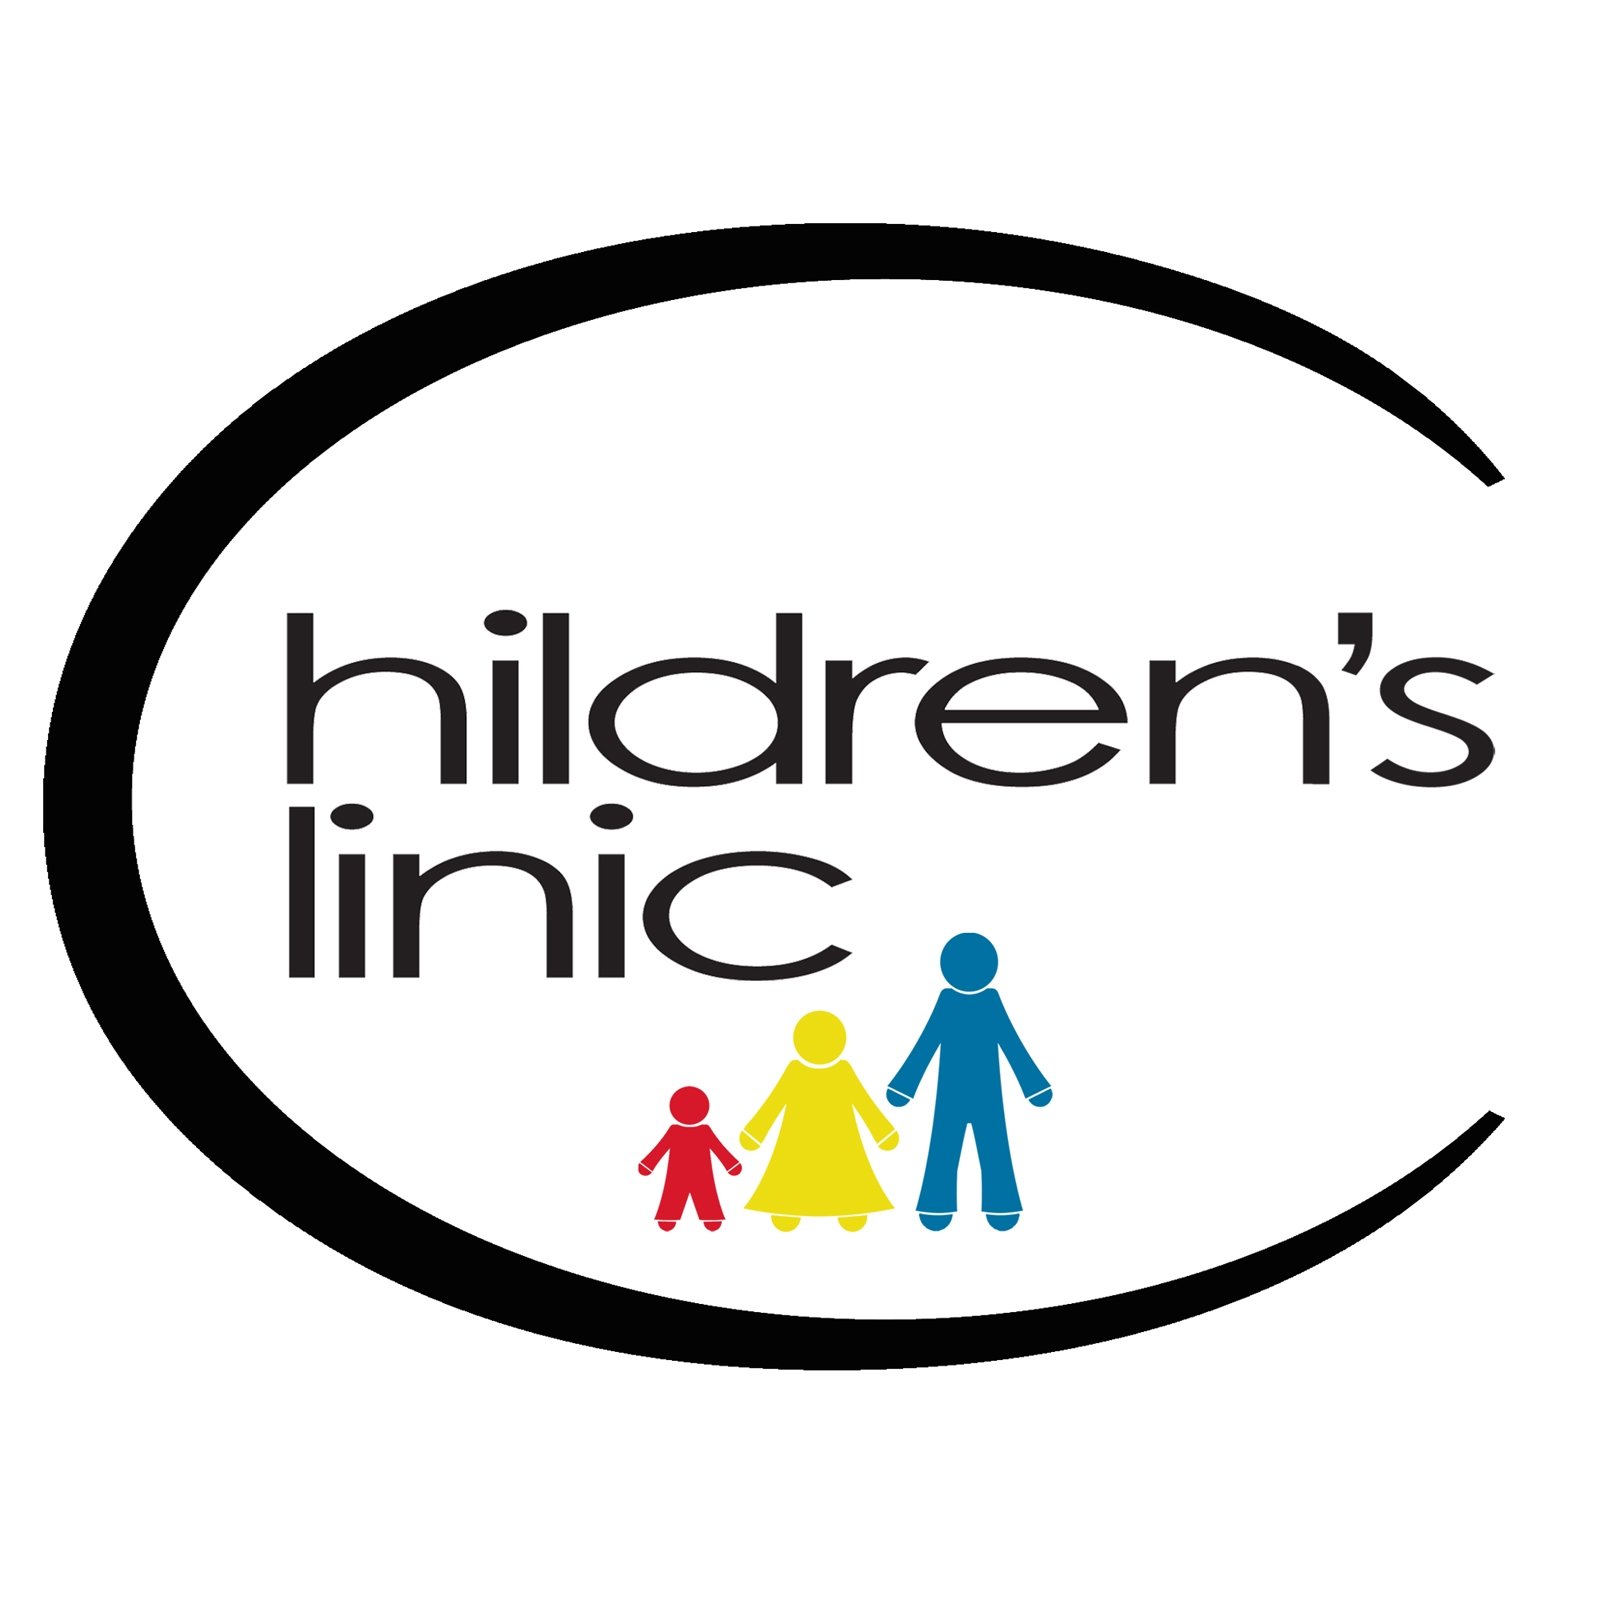 Childrens Clinic